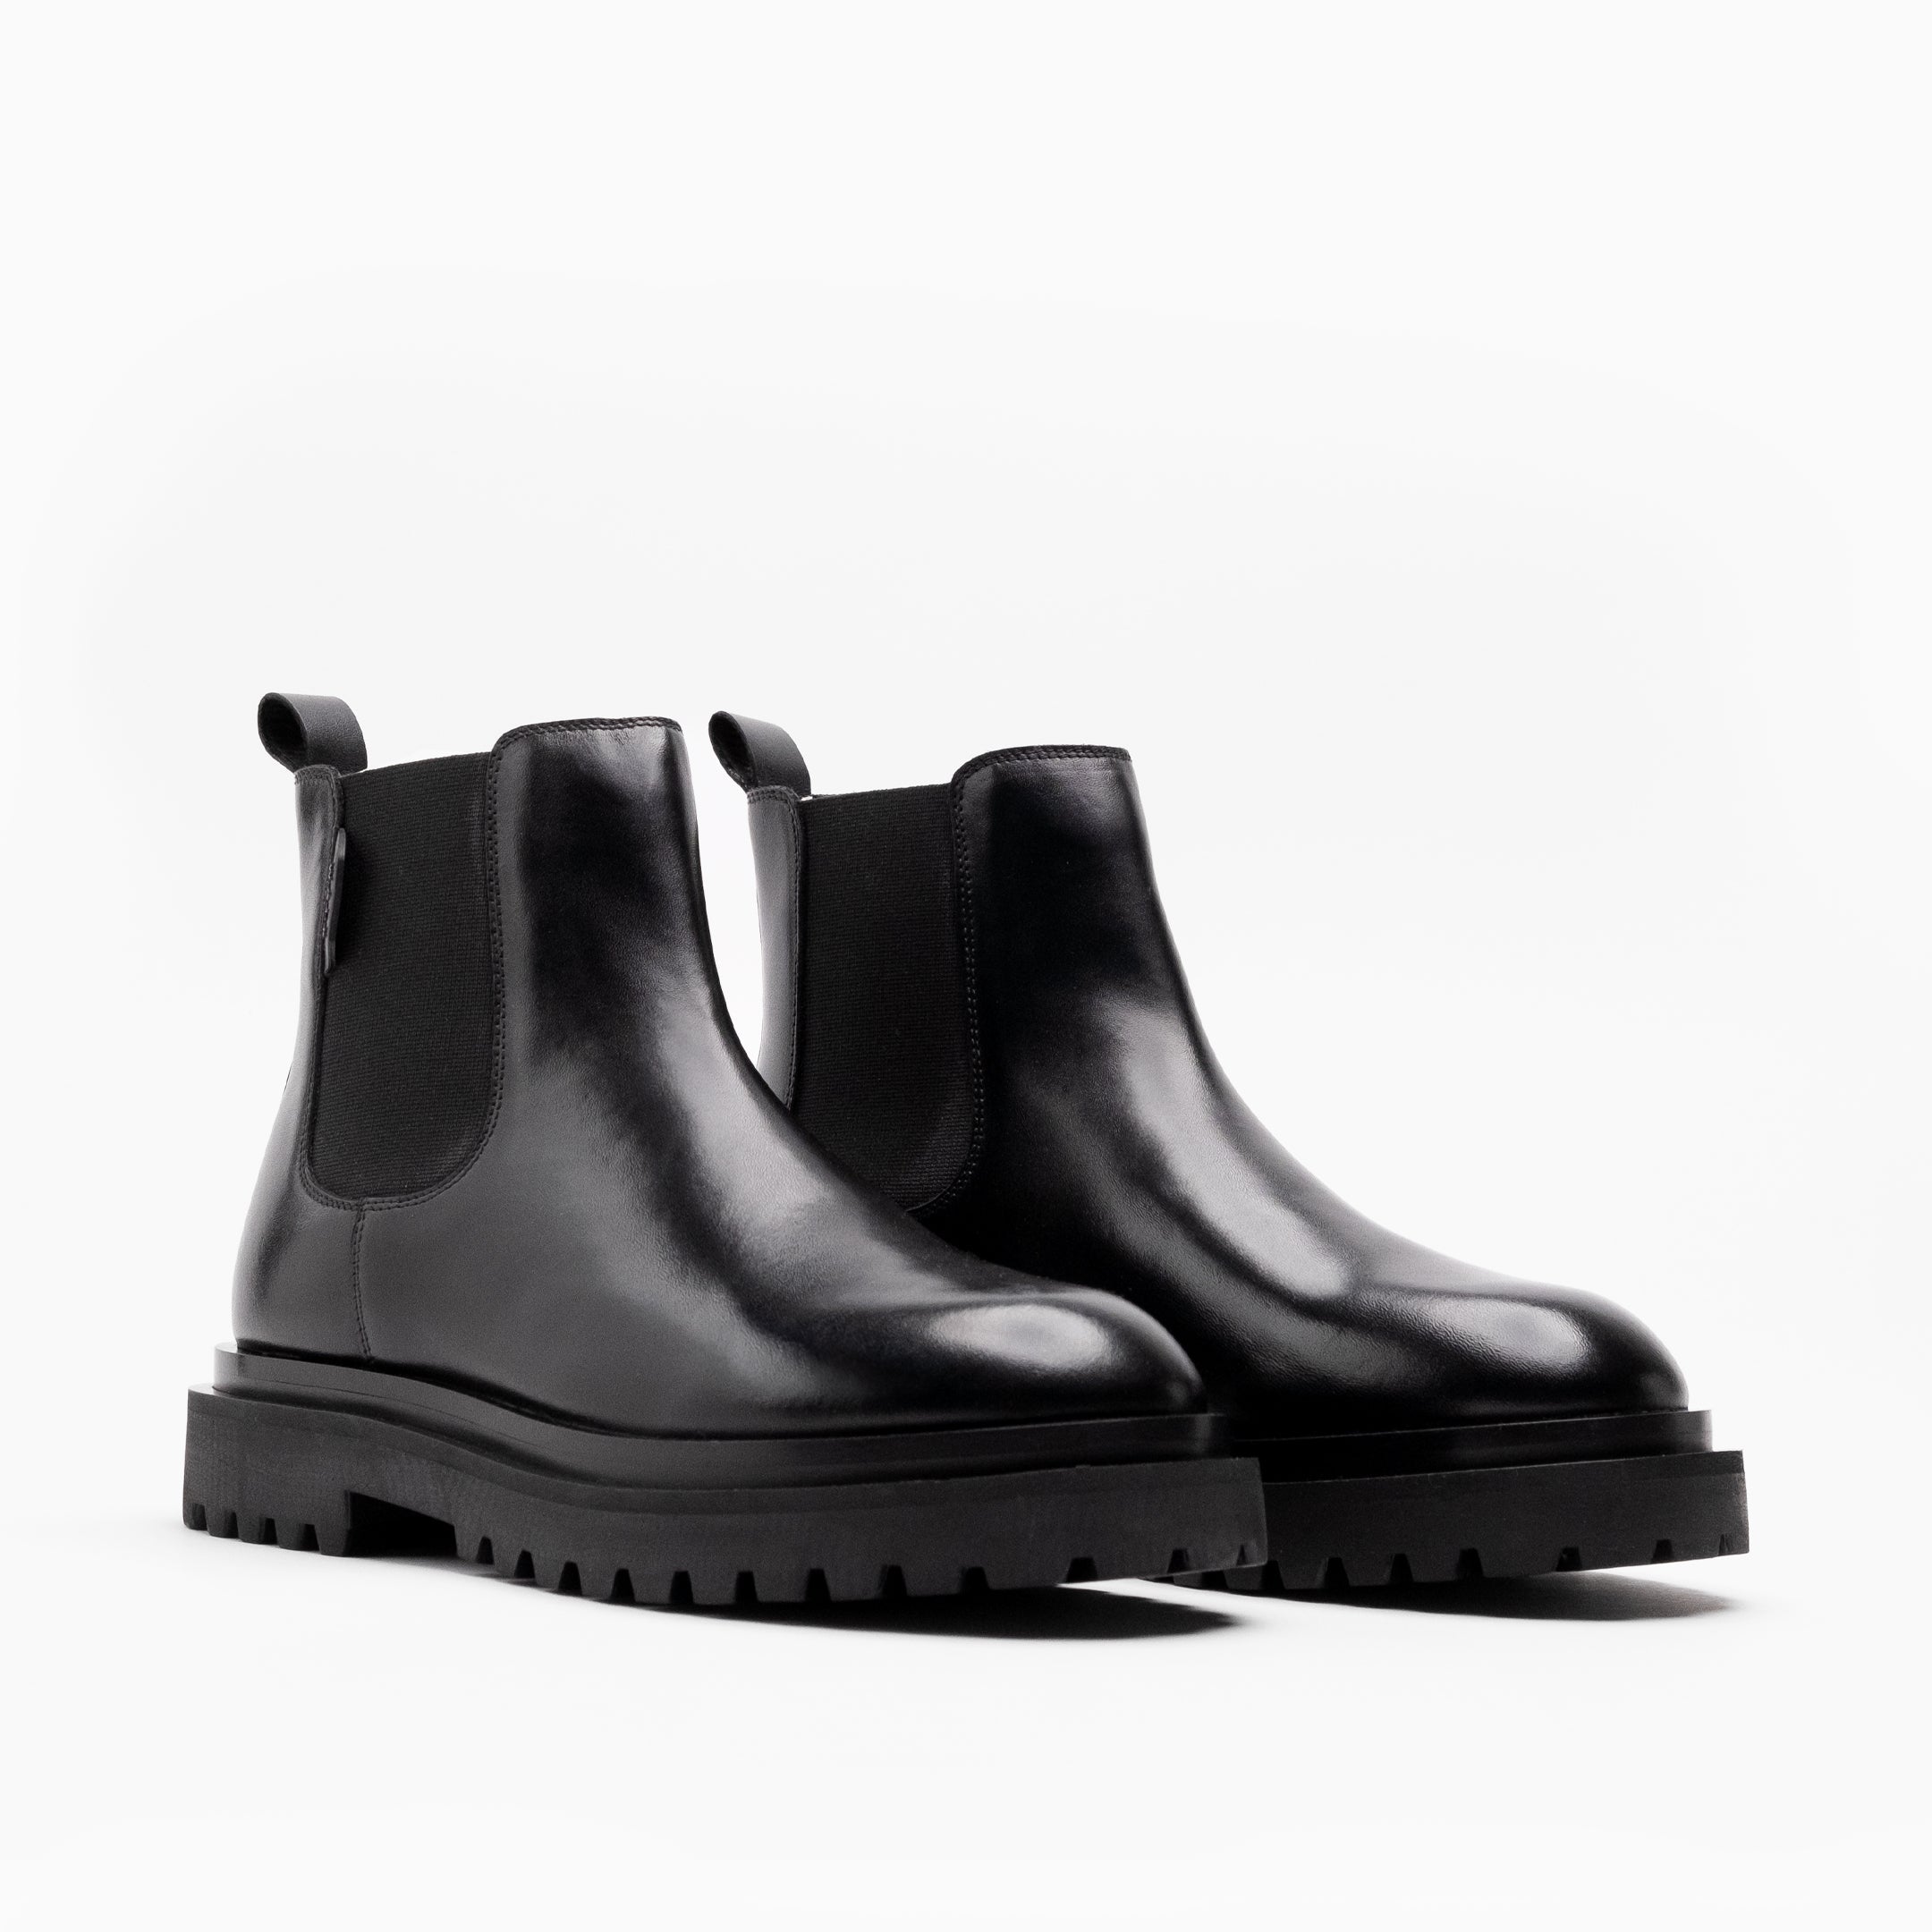 Walk London Mens Sully Chelsea Boot in Black Leather